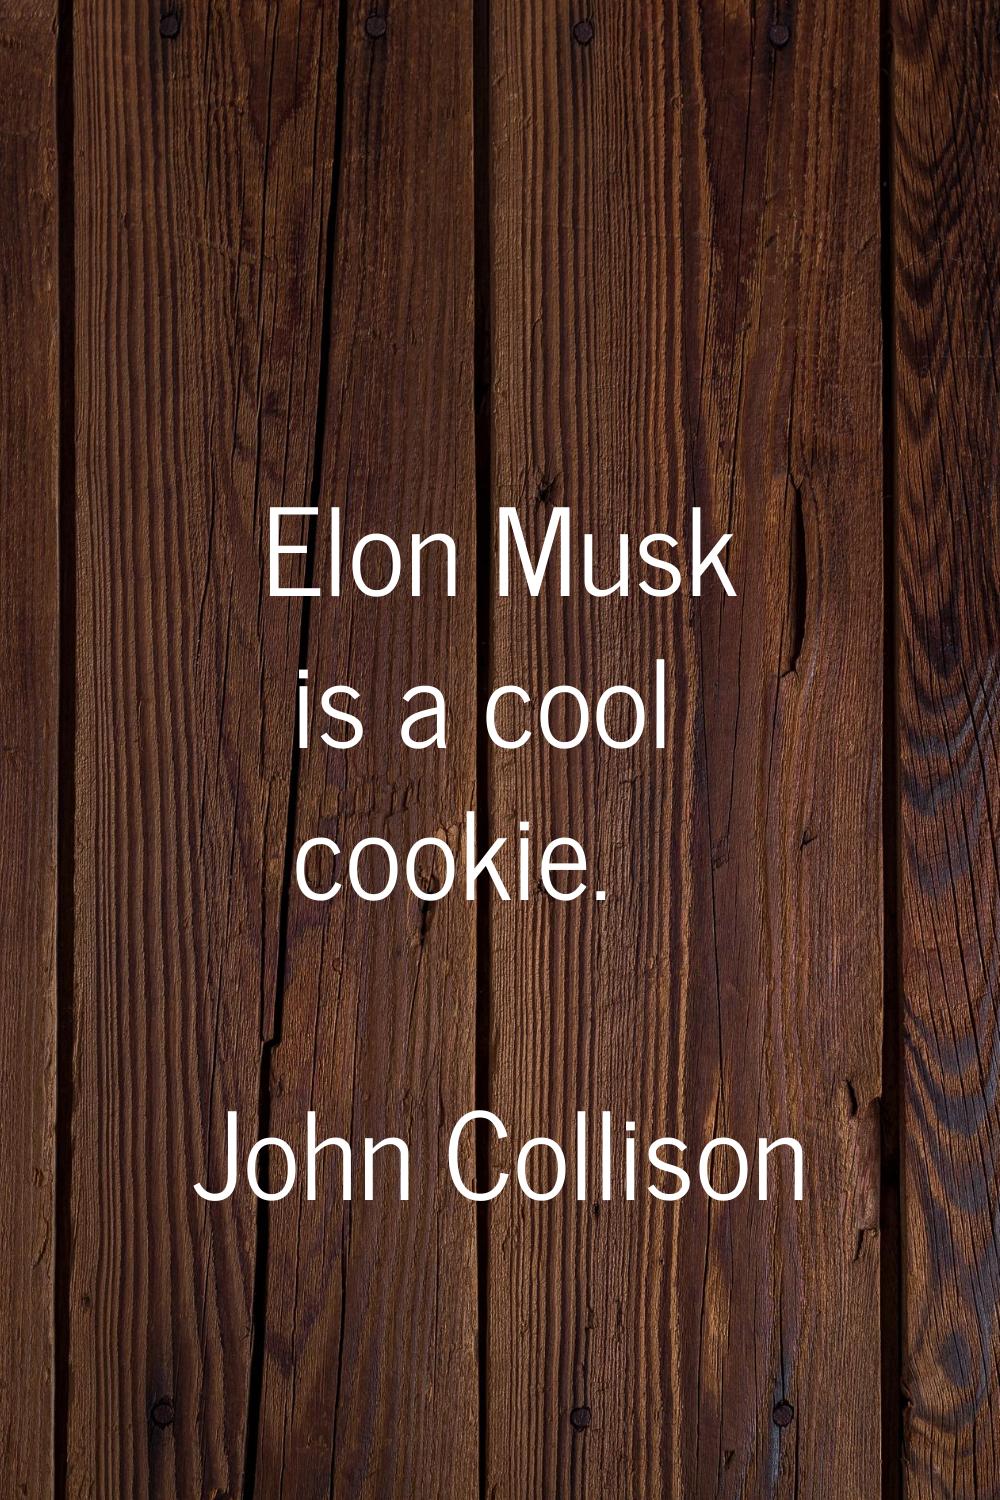 Elon Musk is a cool cookie.